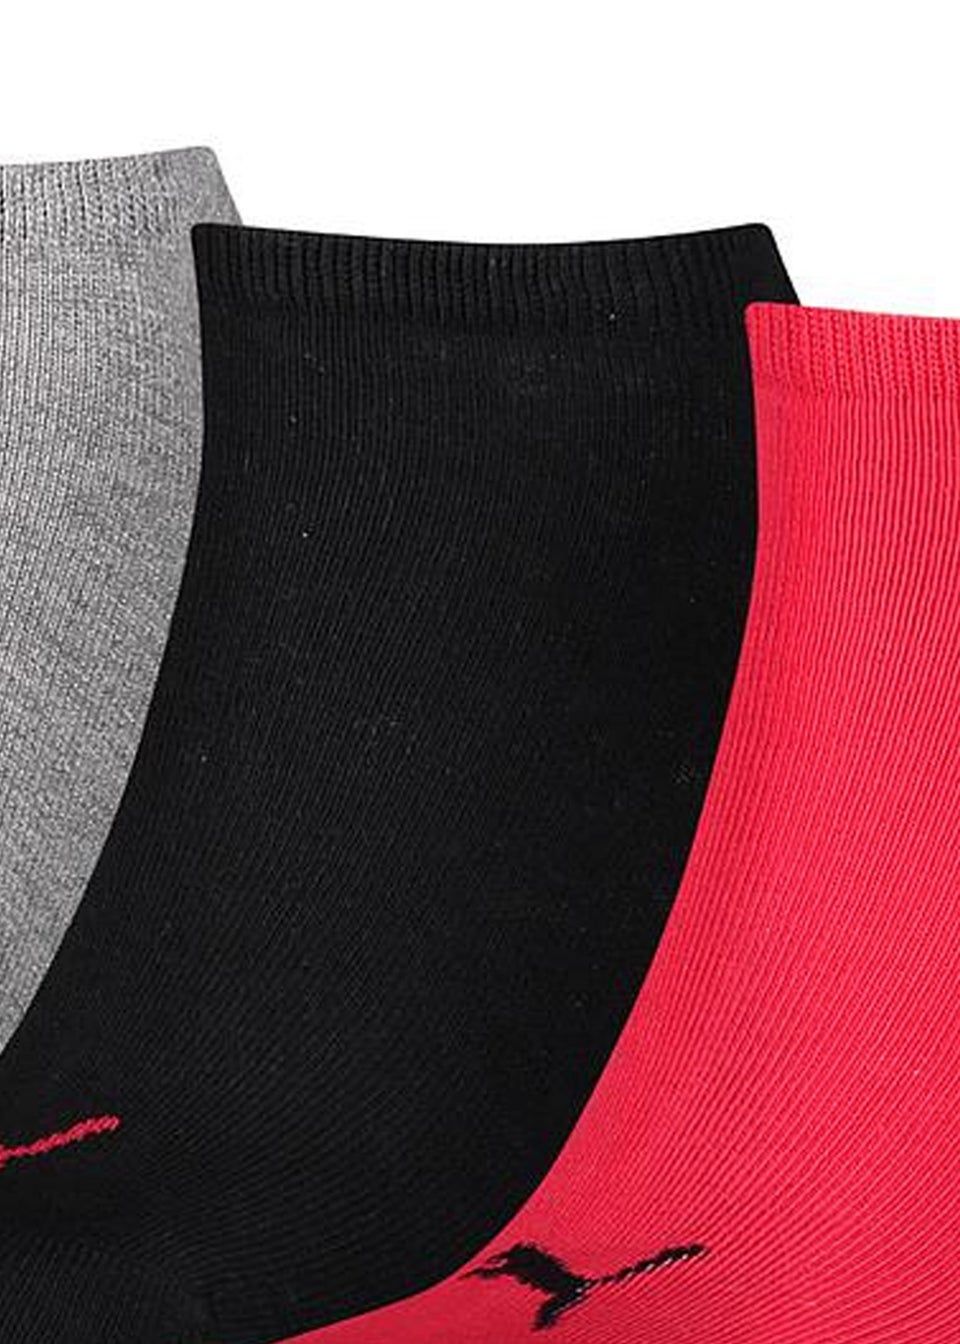 Puma Black/Red Invisible Socks (Pack of 3)